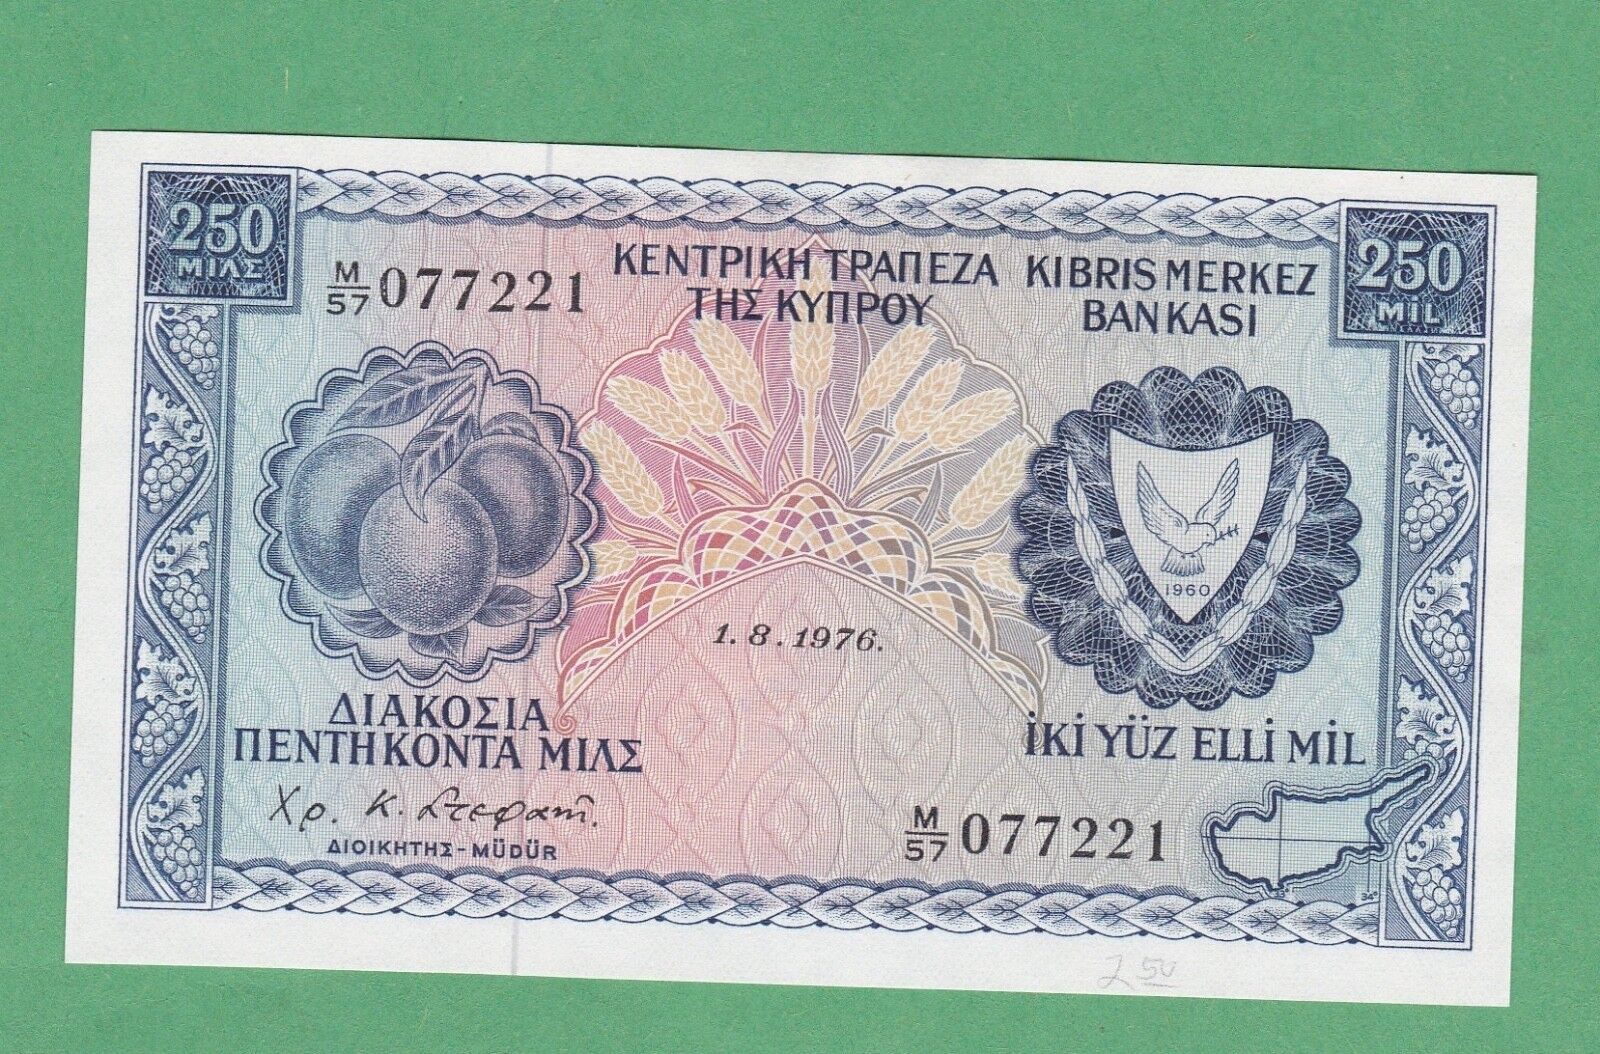 Cyprus 250 Mils  Note P-41c    UNCIRCULATED